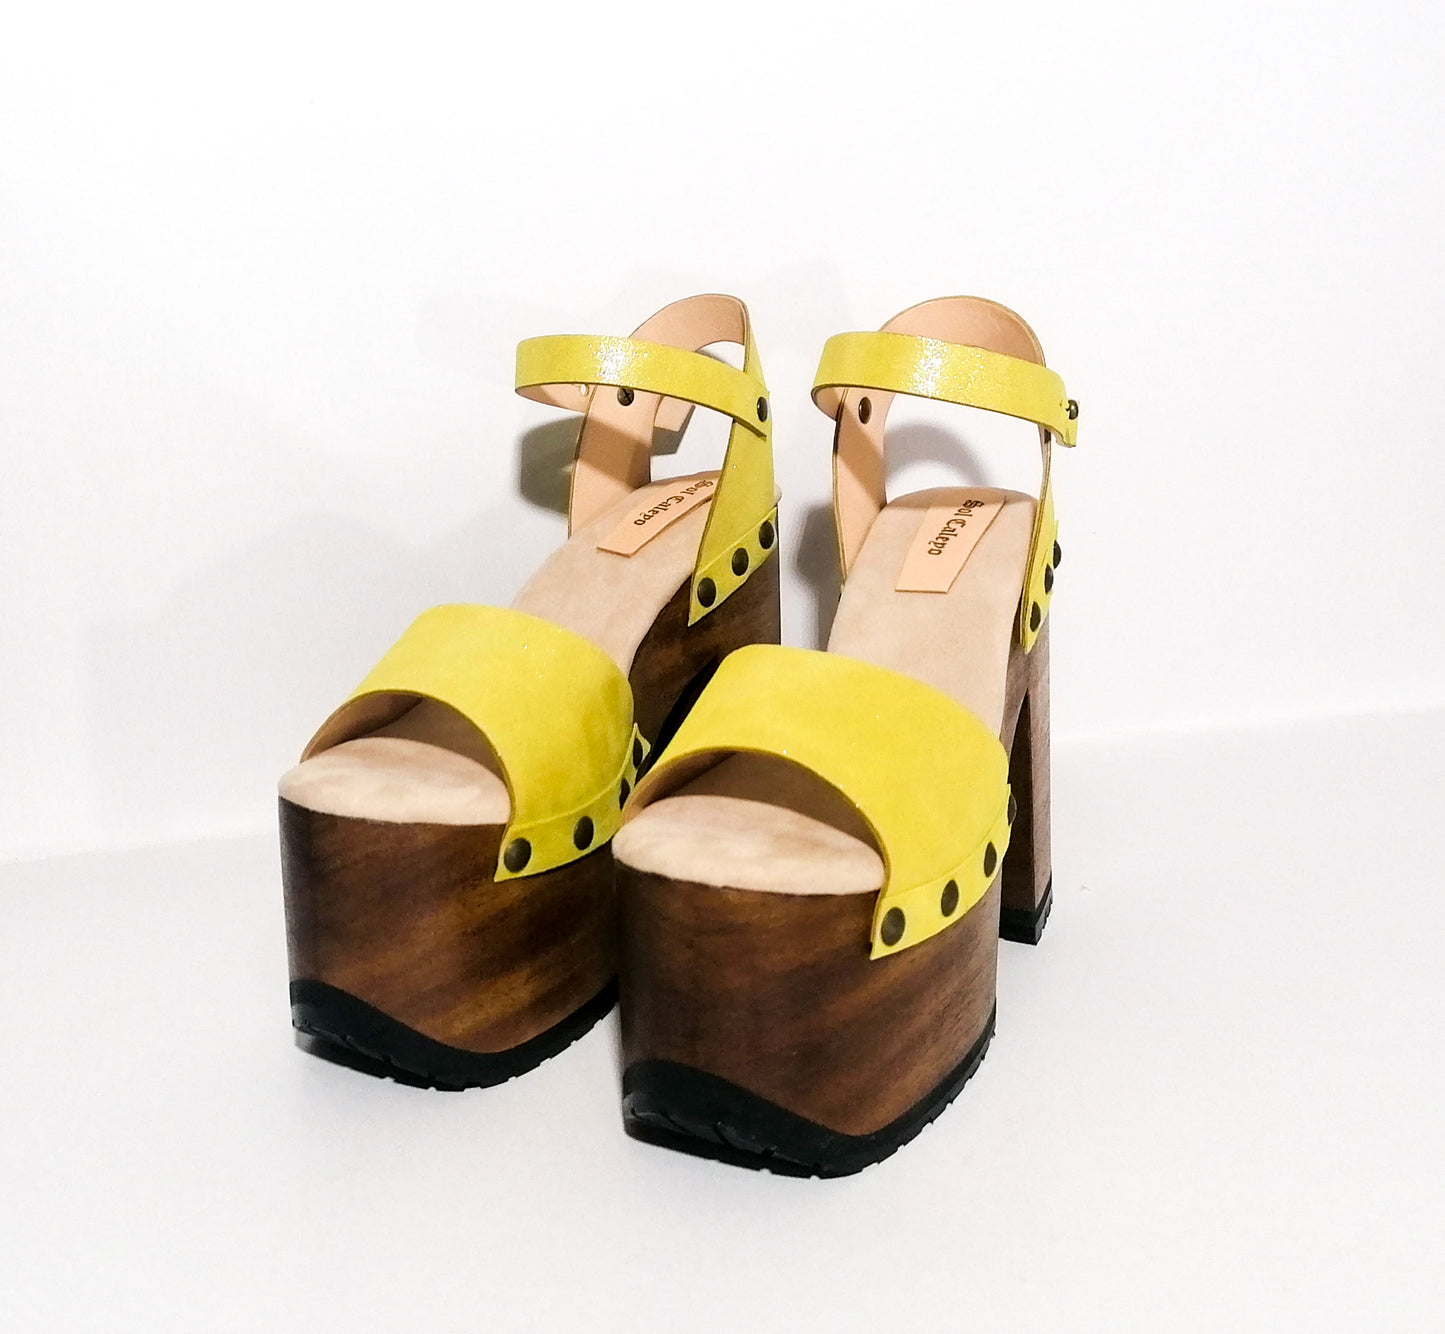 Vintage style yellow platform clog sandals. Super high wooden heel sandal. Vintage 70's style platform sandal. Sizes 34 to 47. High quality leather shoes handmade by sol Caleyo. Sustainable fashion.